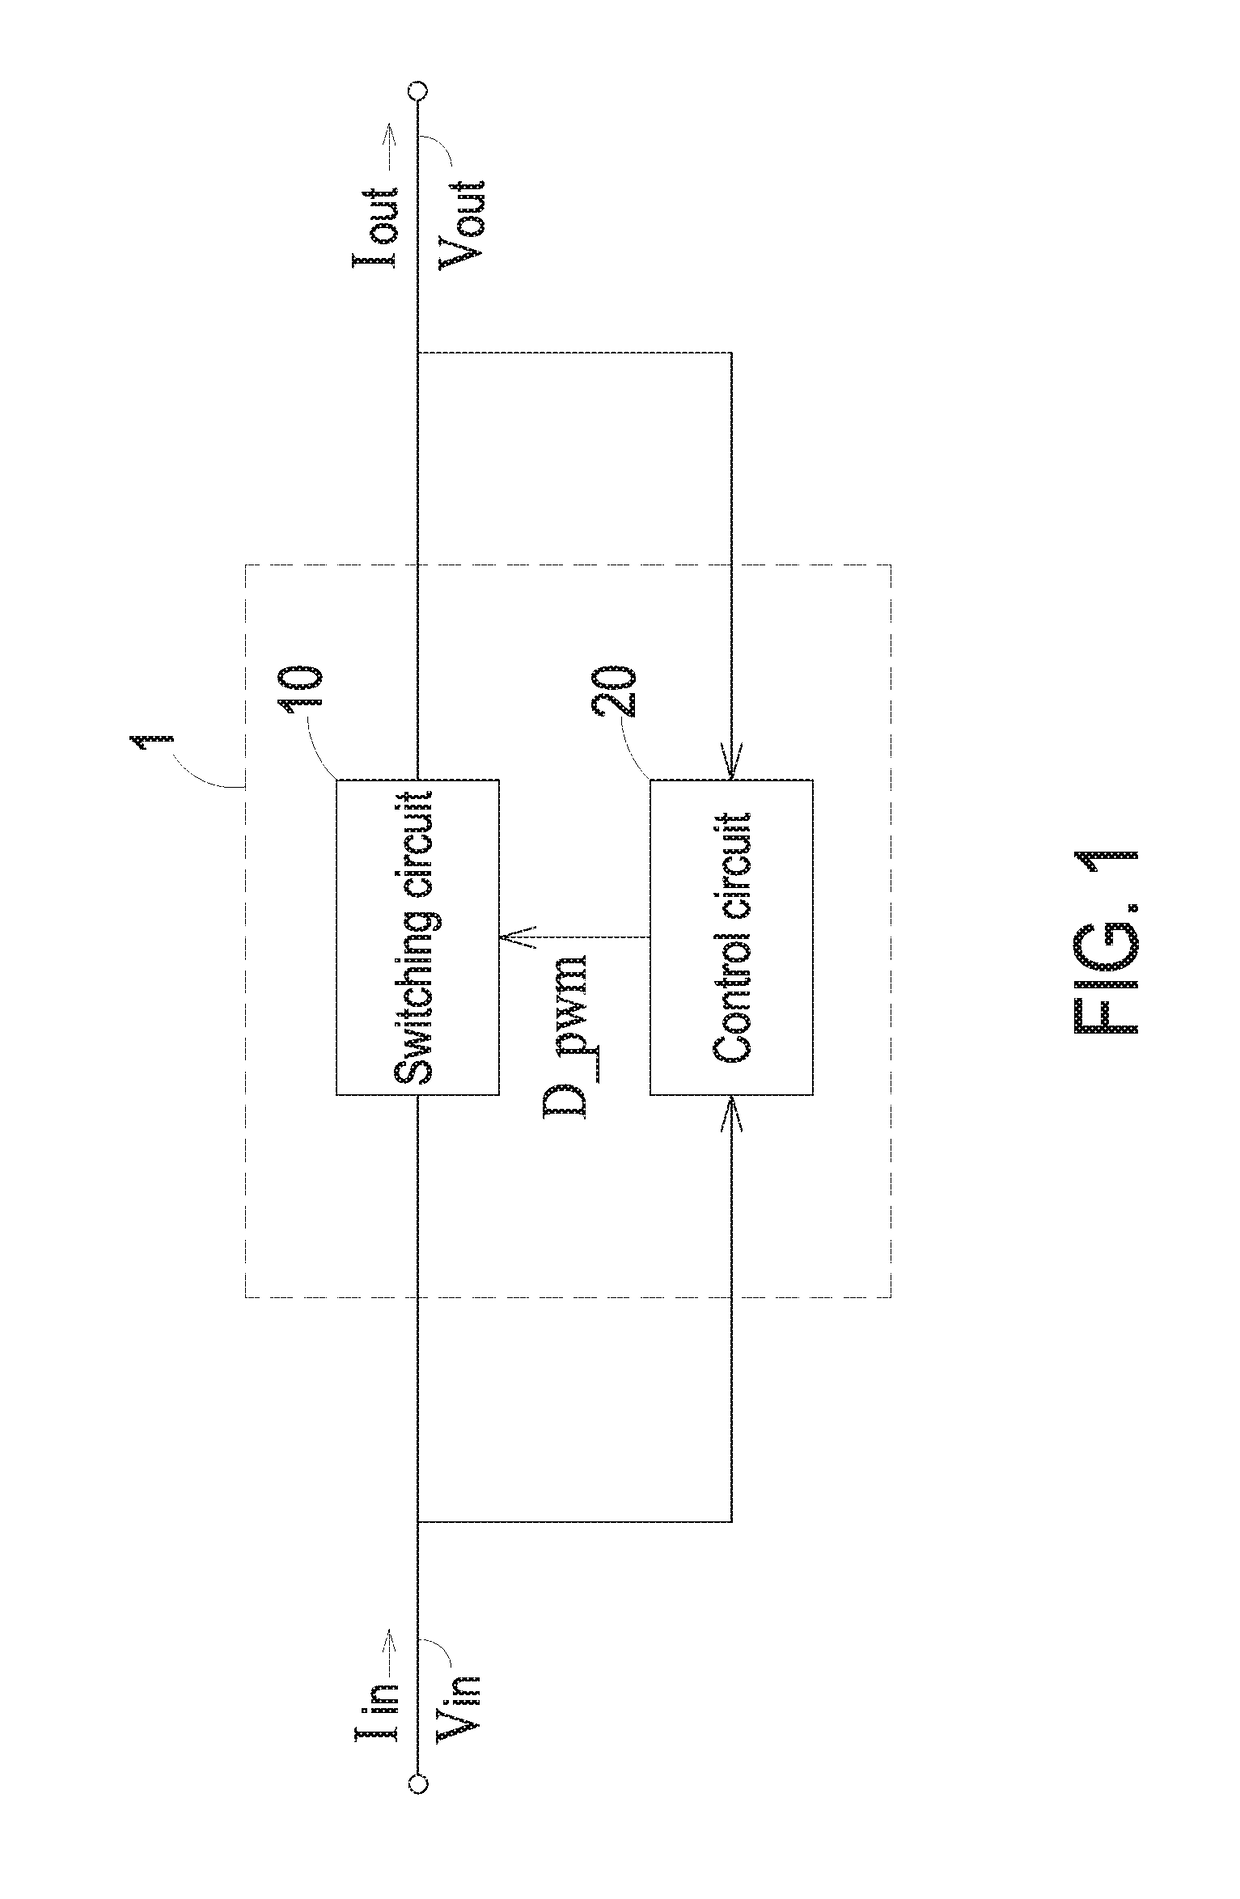 Phase compensation method for power factor correction circuit